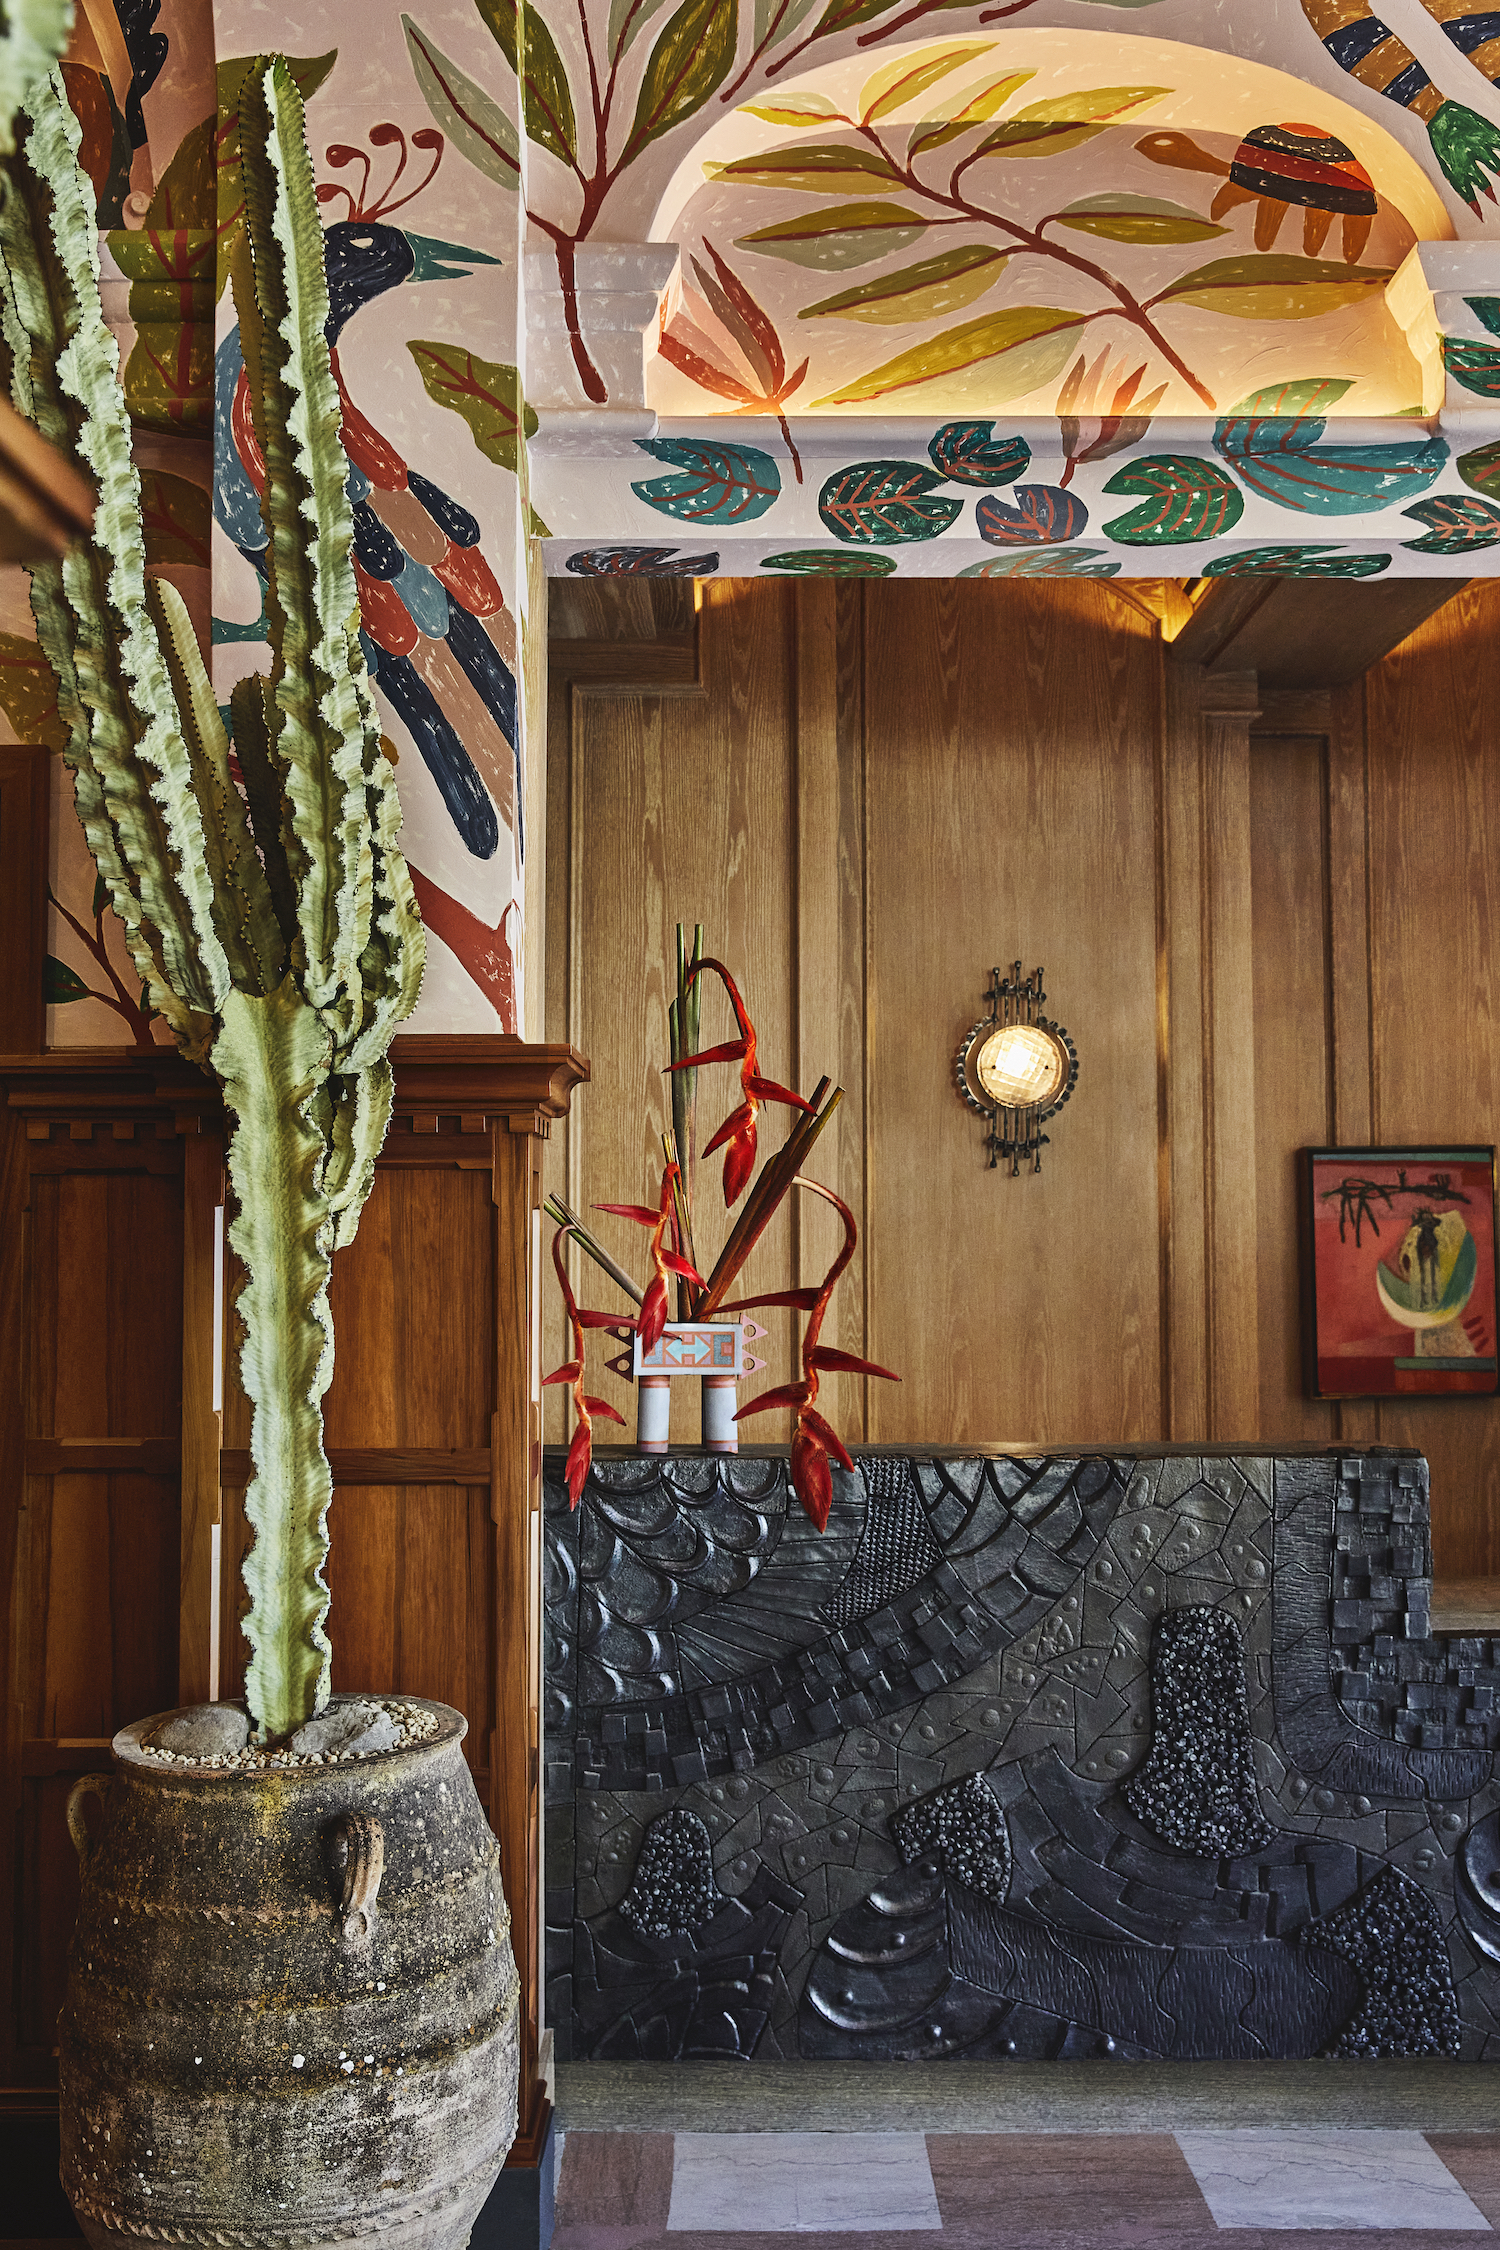 Hotel reception designed by Kelly Wearstler (Image: The Ingalls)